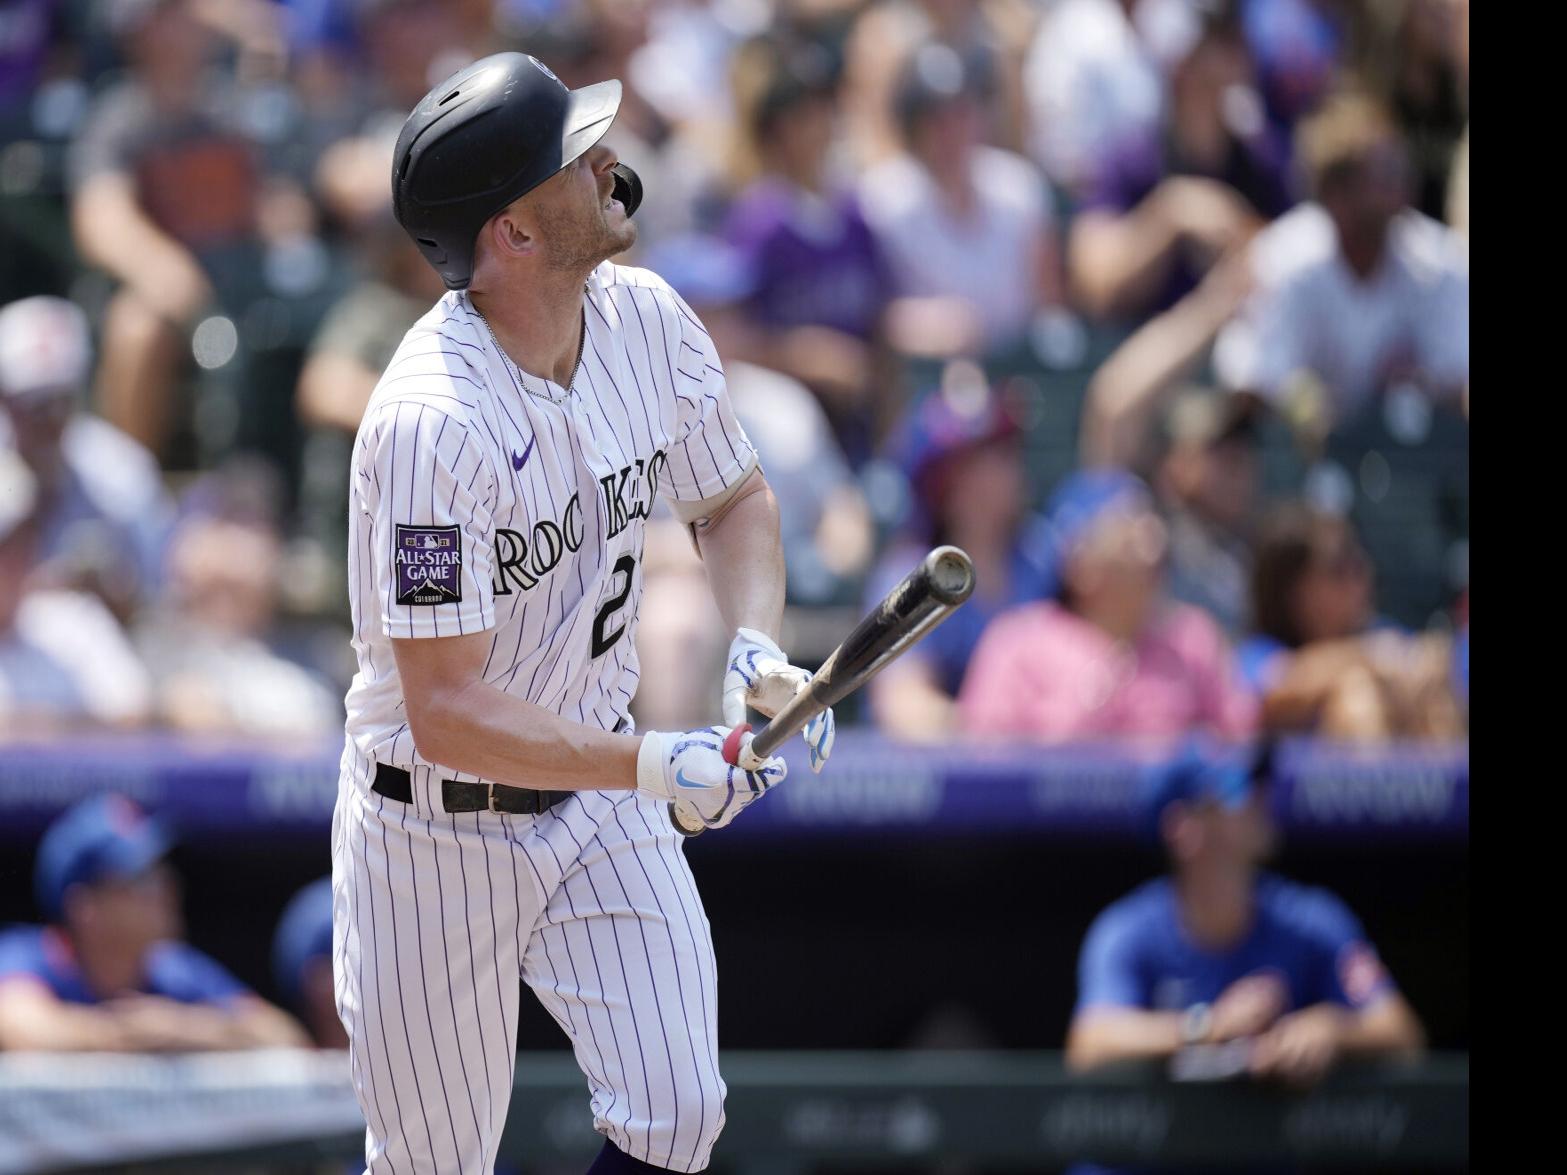 Colorado Rockies injury update: What we know about Trevor Story